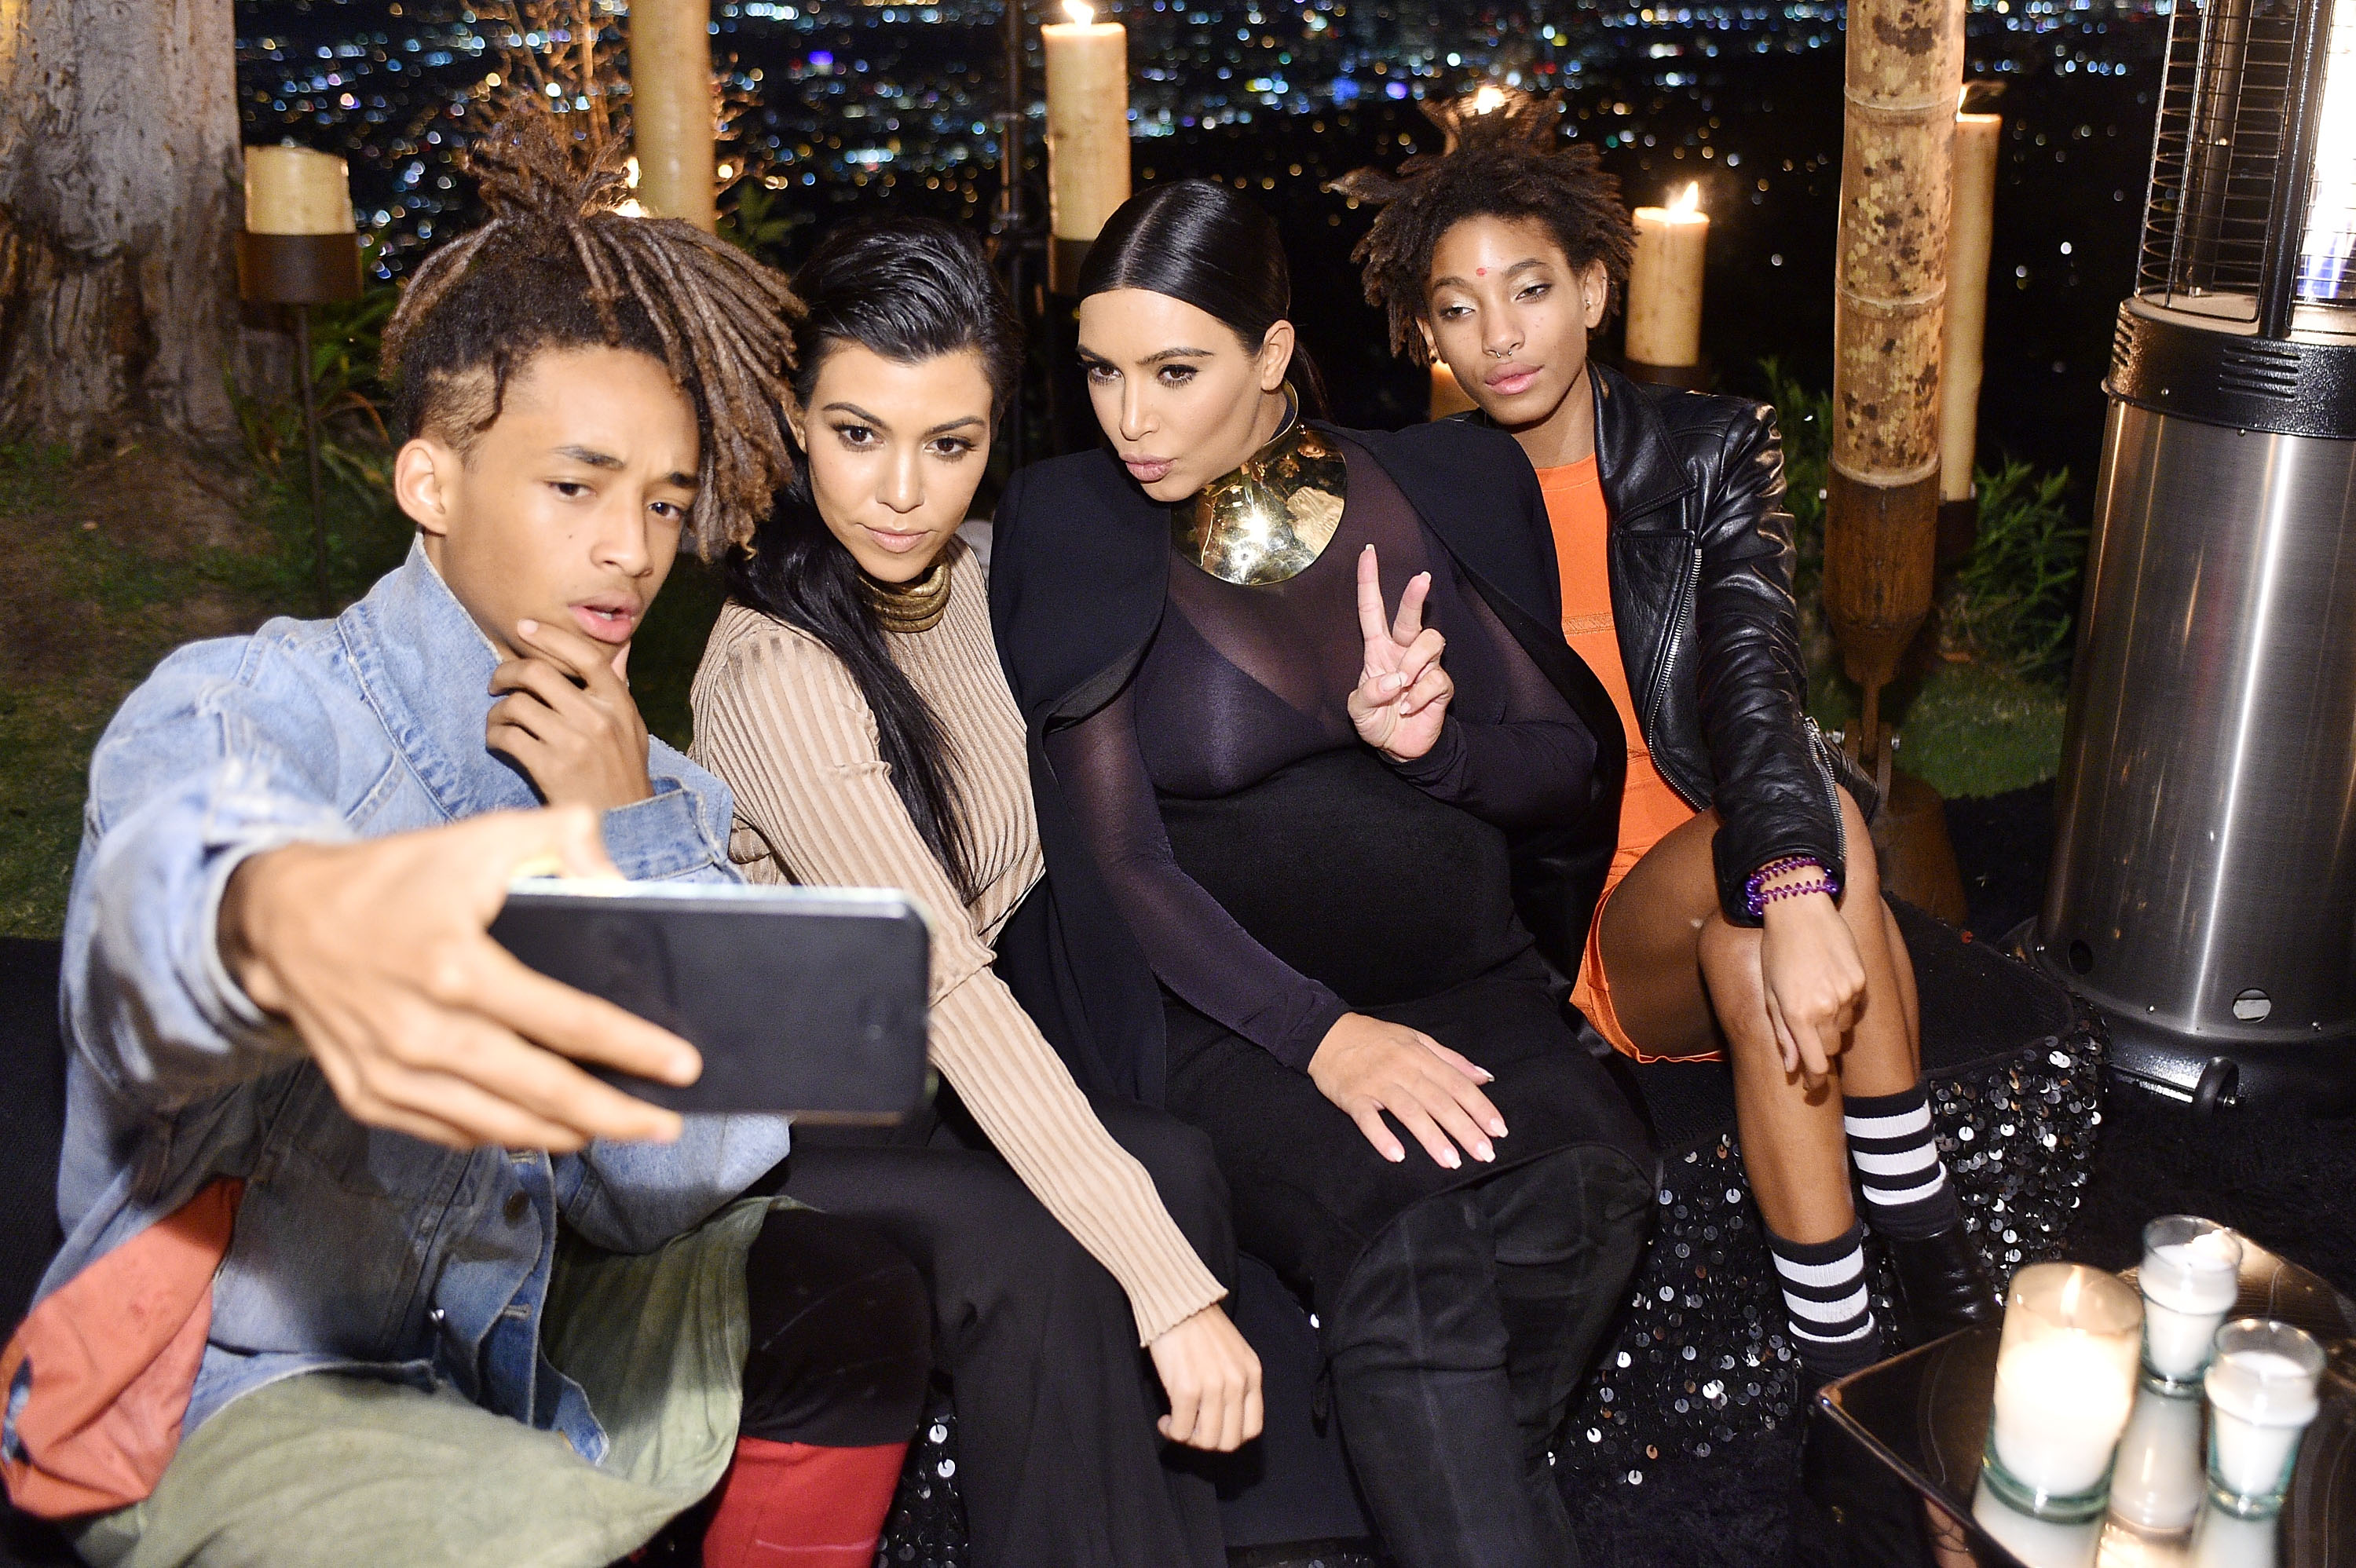 (L-R) Jaden Smith, Kourtney Kardashian, Kim Kardashian West and Willow Smith attend Olivier Rousteing & Beats Celebrate In Los Angeles at Private Residence on October 23, 2015 in Los Angeles, California.